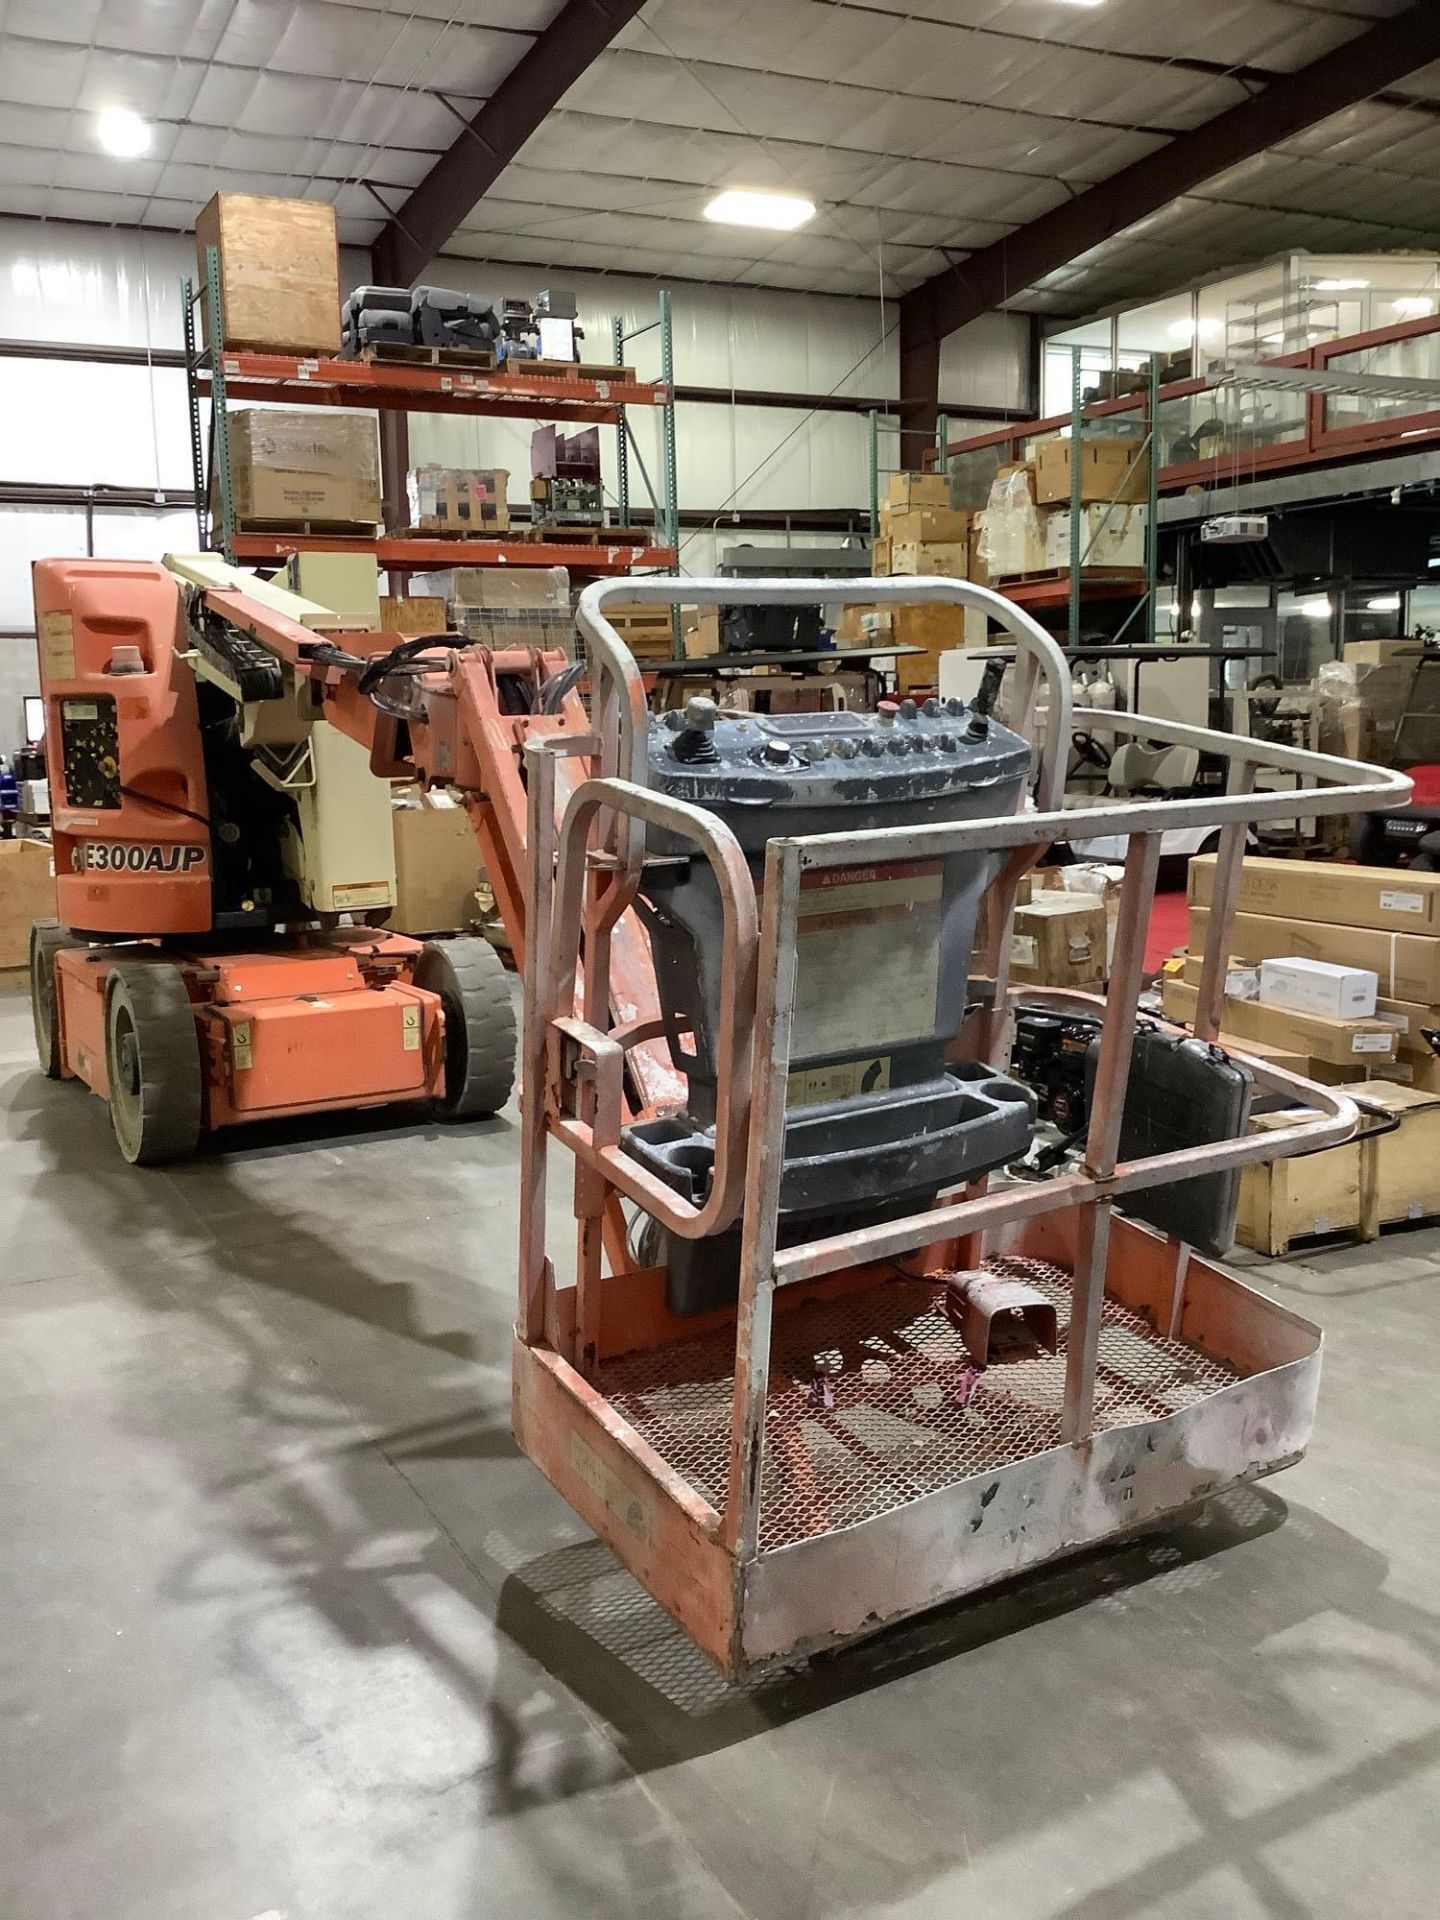 2008 JLG BOOM LIFT MODEL E300AJP, ELECTRIC, APPROX MAX PLATFORM HEIGHT 30FT - Image 12 of 17